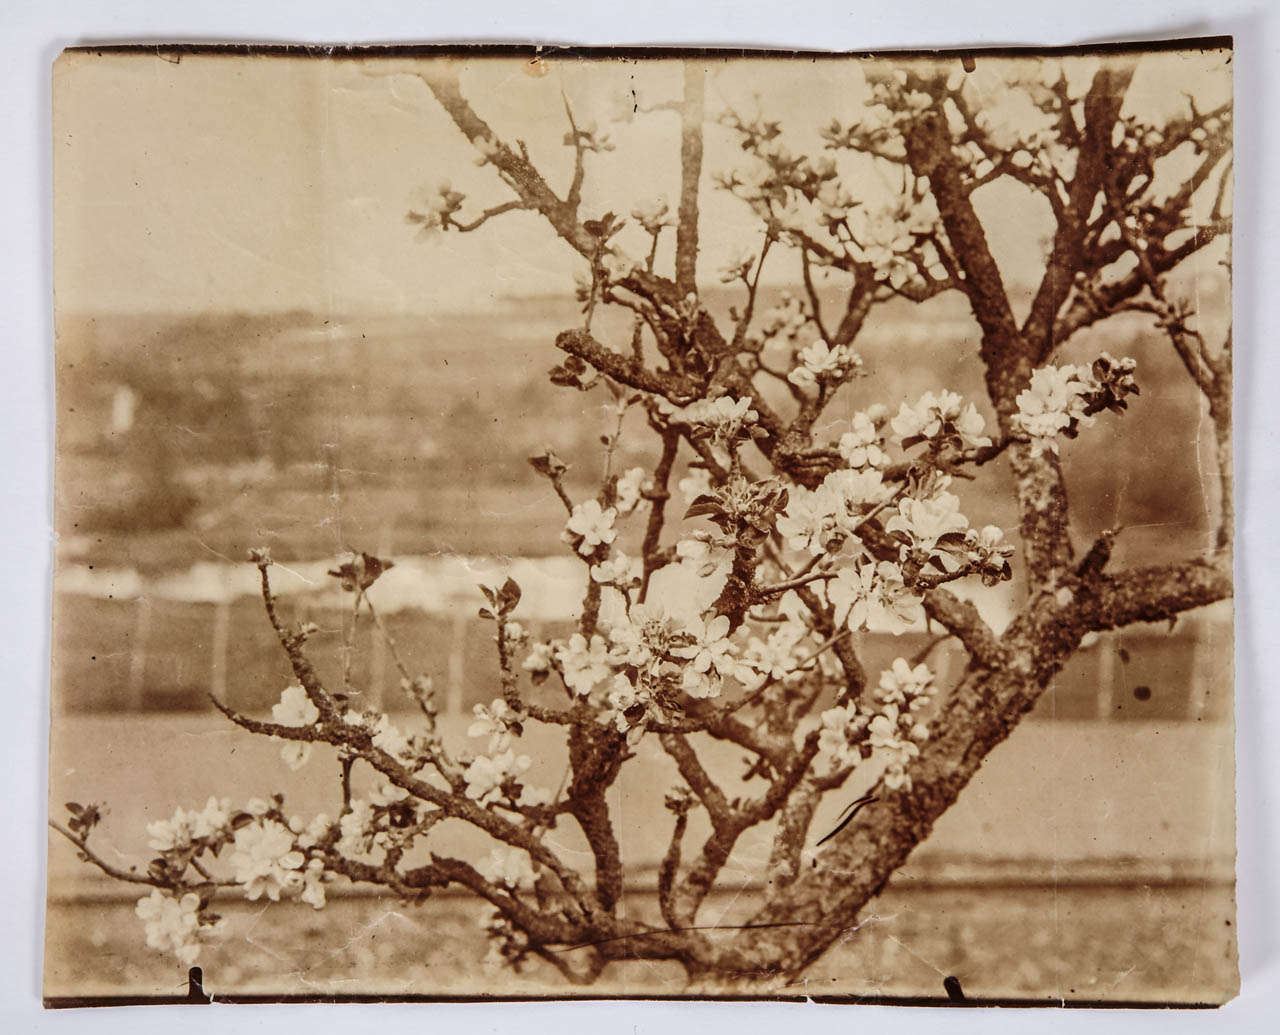 Albumen print from the period by Euge`ne Atget representing an apple tree branch in full blossom. Written on the back by the photographer : 'Branche de pommier, N°55.' (Apple tree, negative N°55)
1900 period.